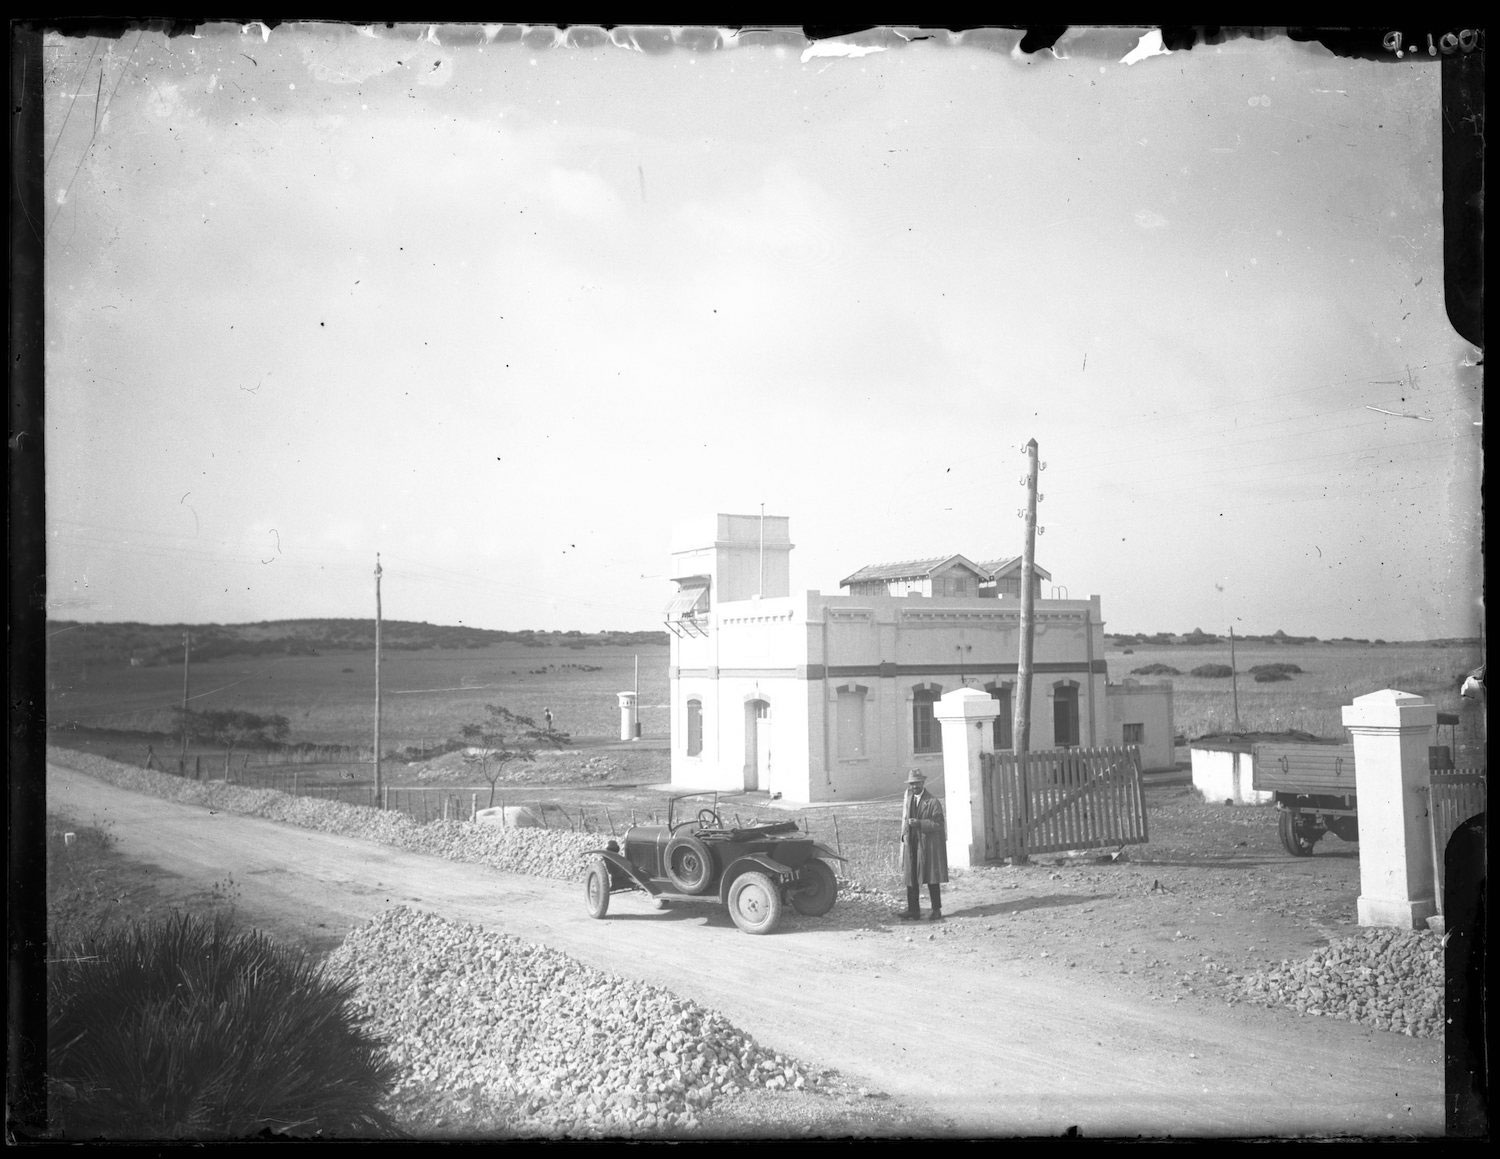 Portrait of man in European dress with car in front of a roadside structure